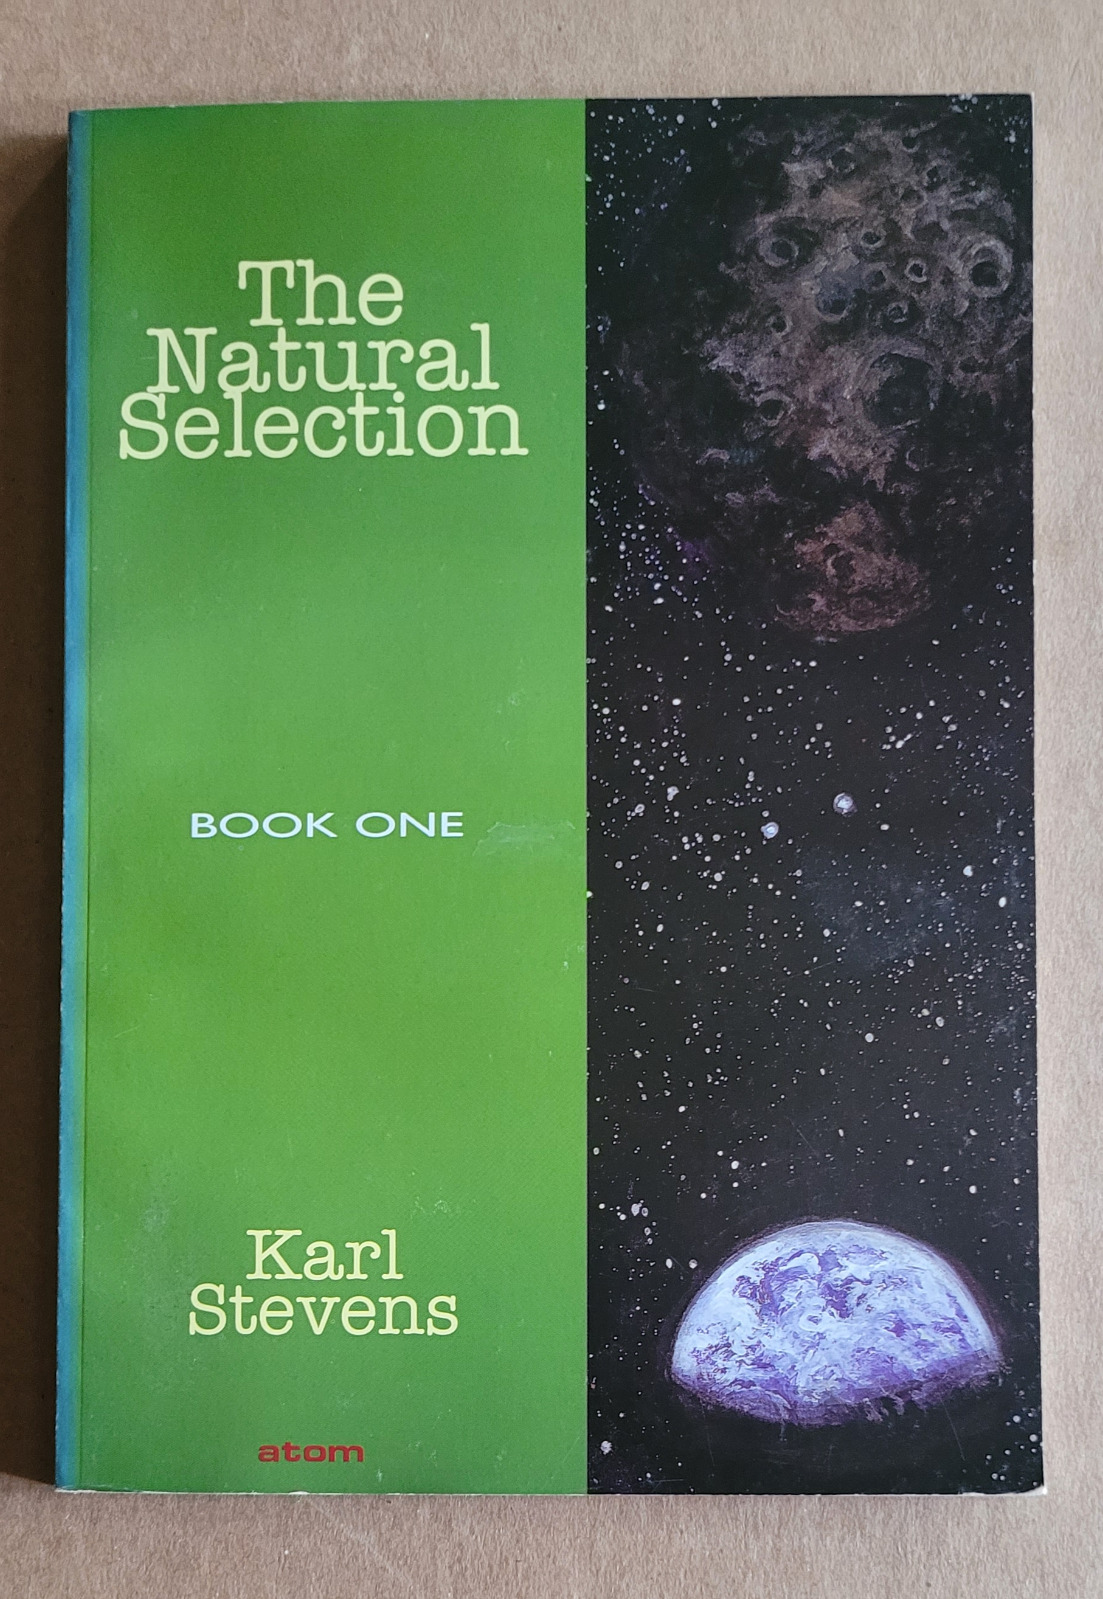 The Natural Selection Book 1 graphic novel by Karl Stevens, Atom Books